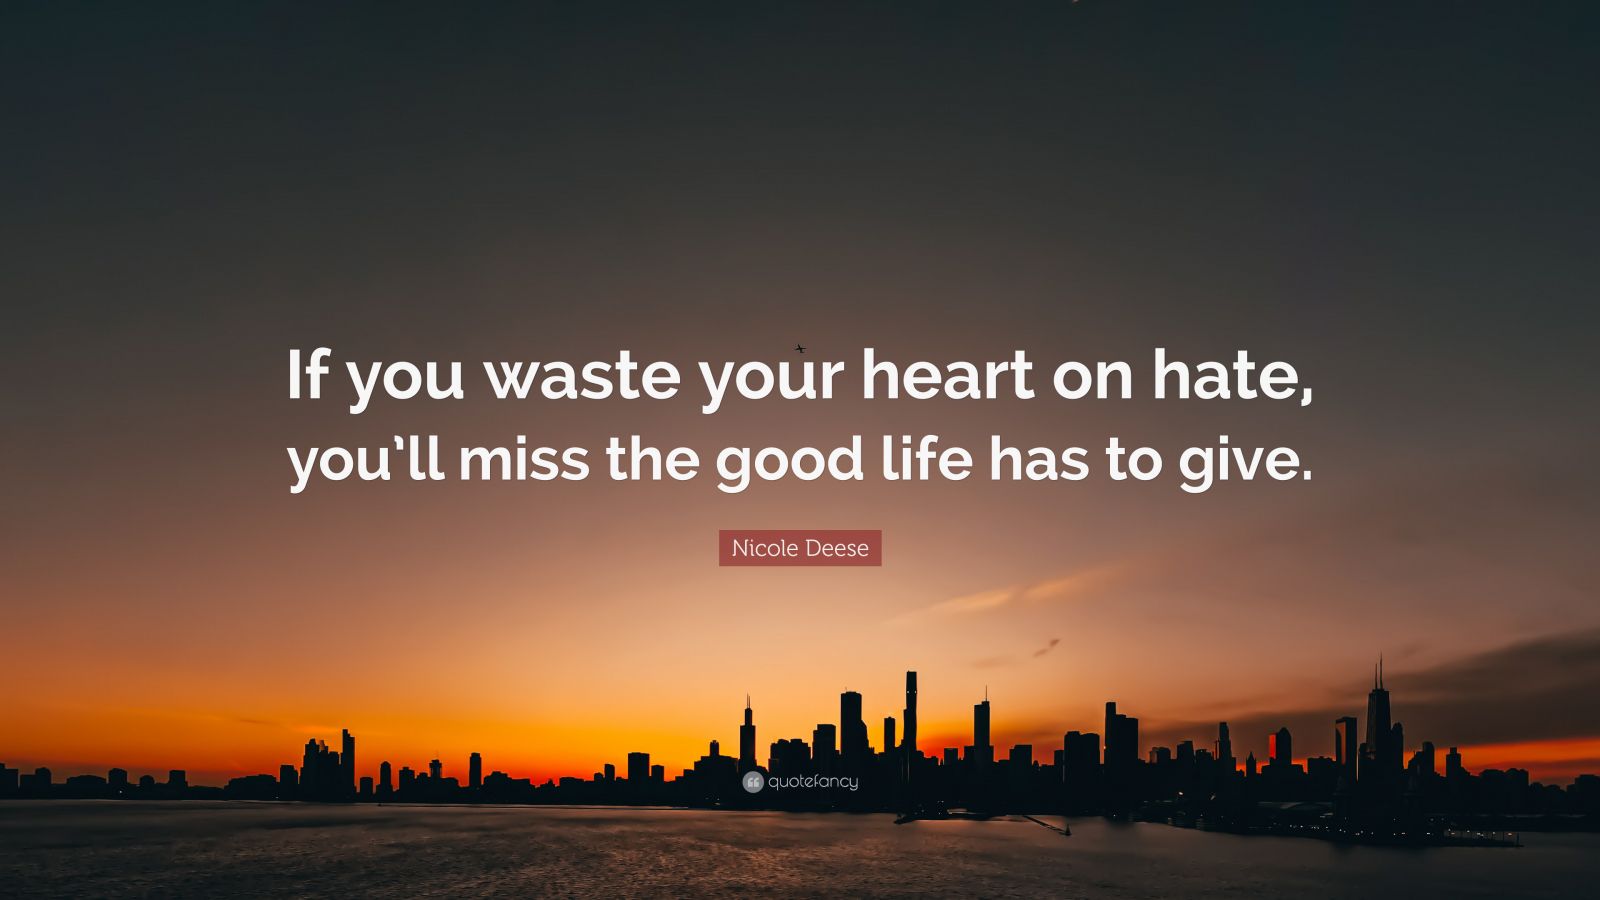 Nicole Deese Quote: “If you waste your heart on hate, you’ll miss the ...